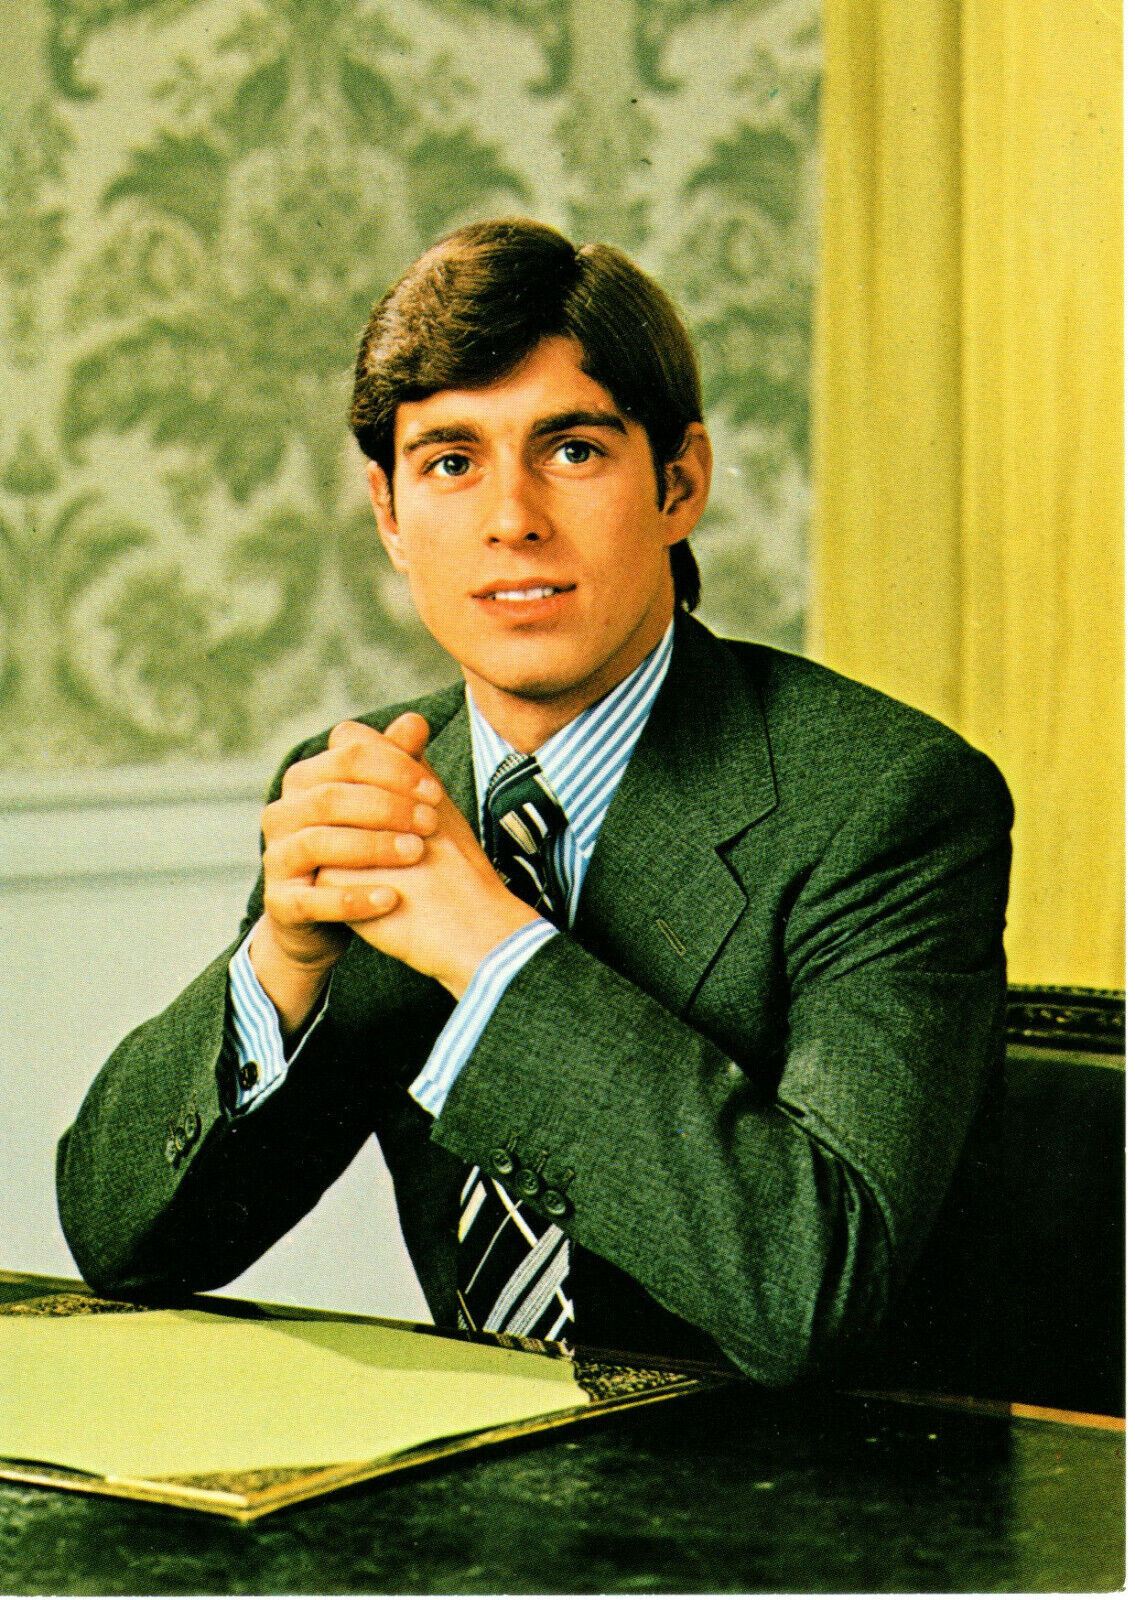 H.R.H. the Prince Andrew, UK Postcard